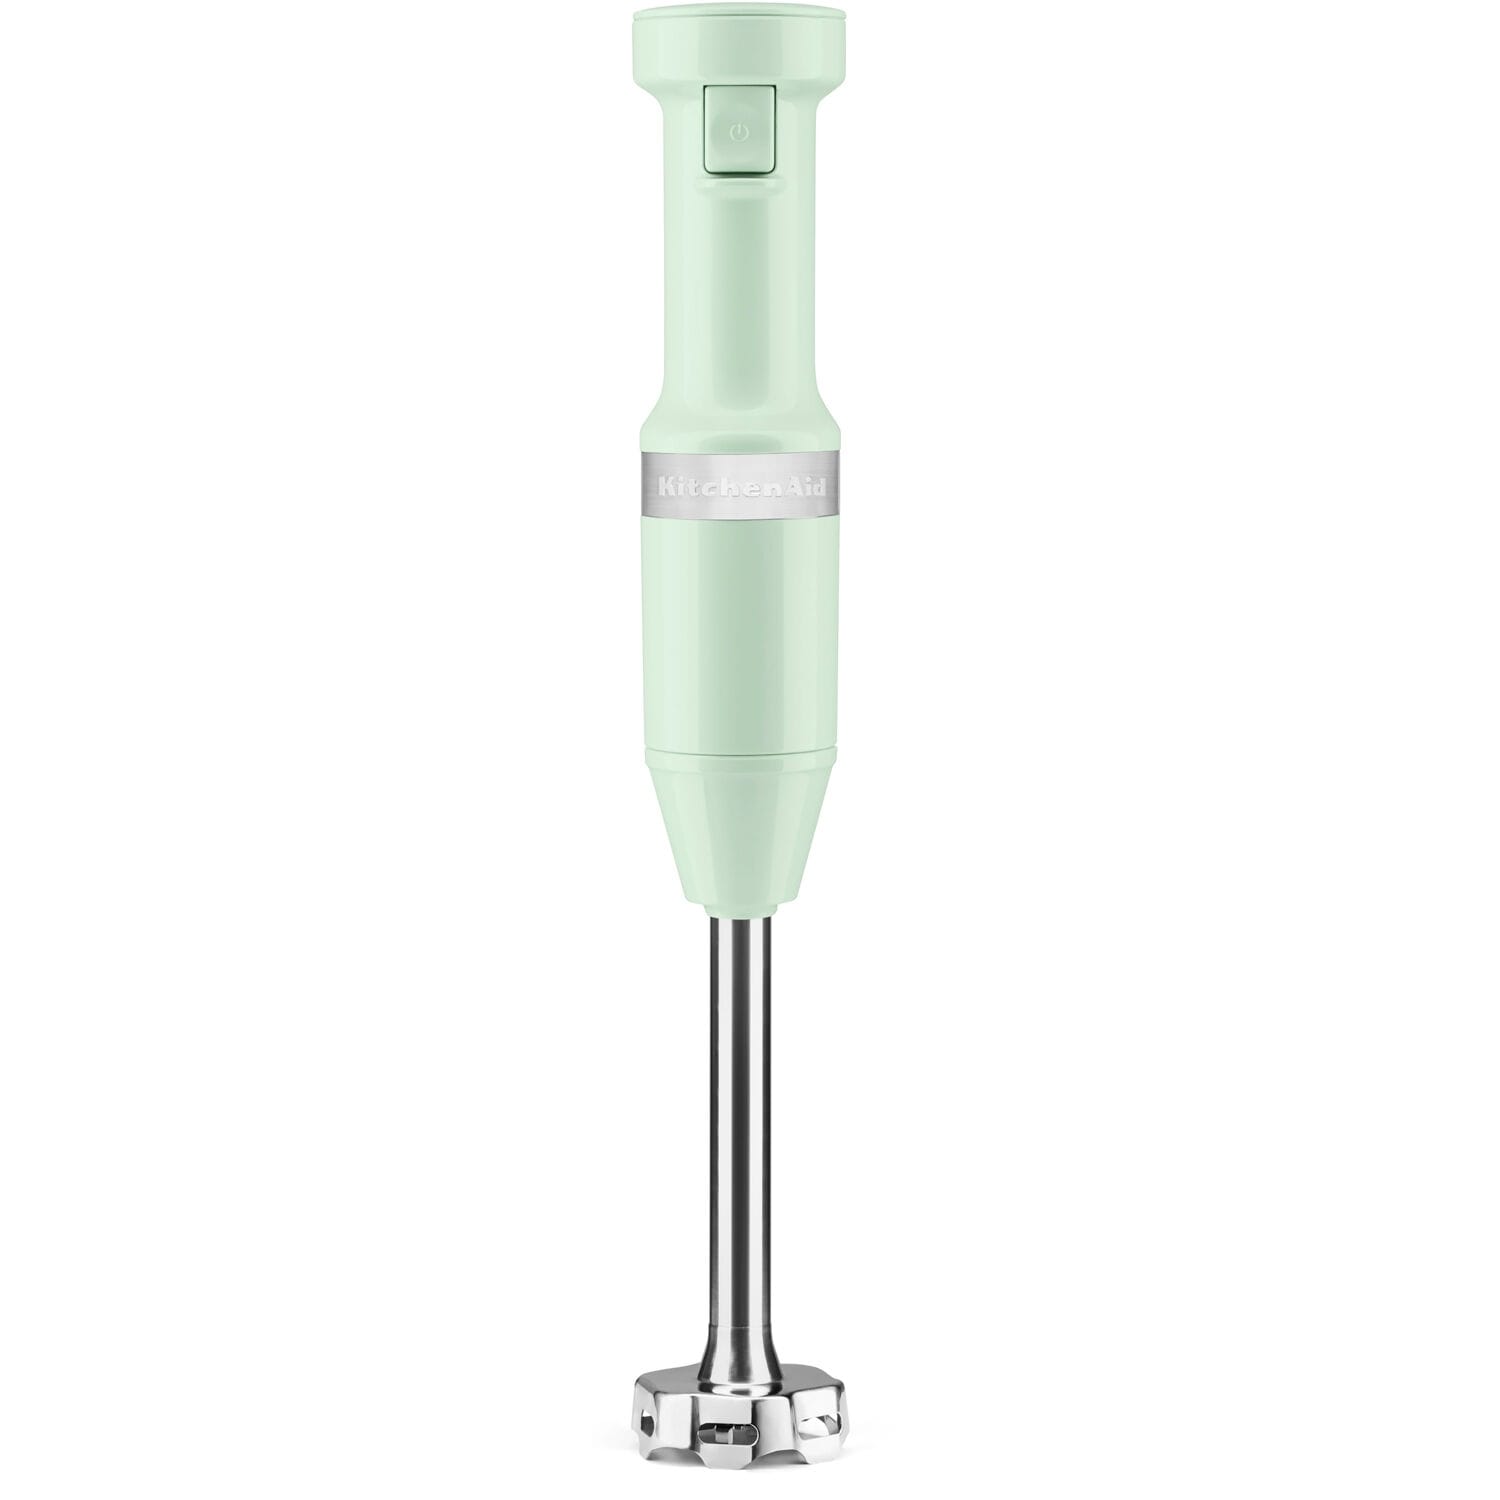 https://ak1.ostkcdn.com/images/products/is/images/direct/ec524f9f734b142be2c4ad69e1ed46d367cdfac0/KitchenAid-Corded-Variable-Speed-Immersion-Blender-in-Pistachio-with-Blending-Jar.jpg